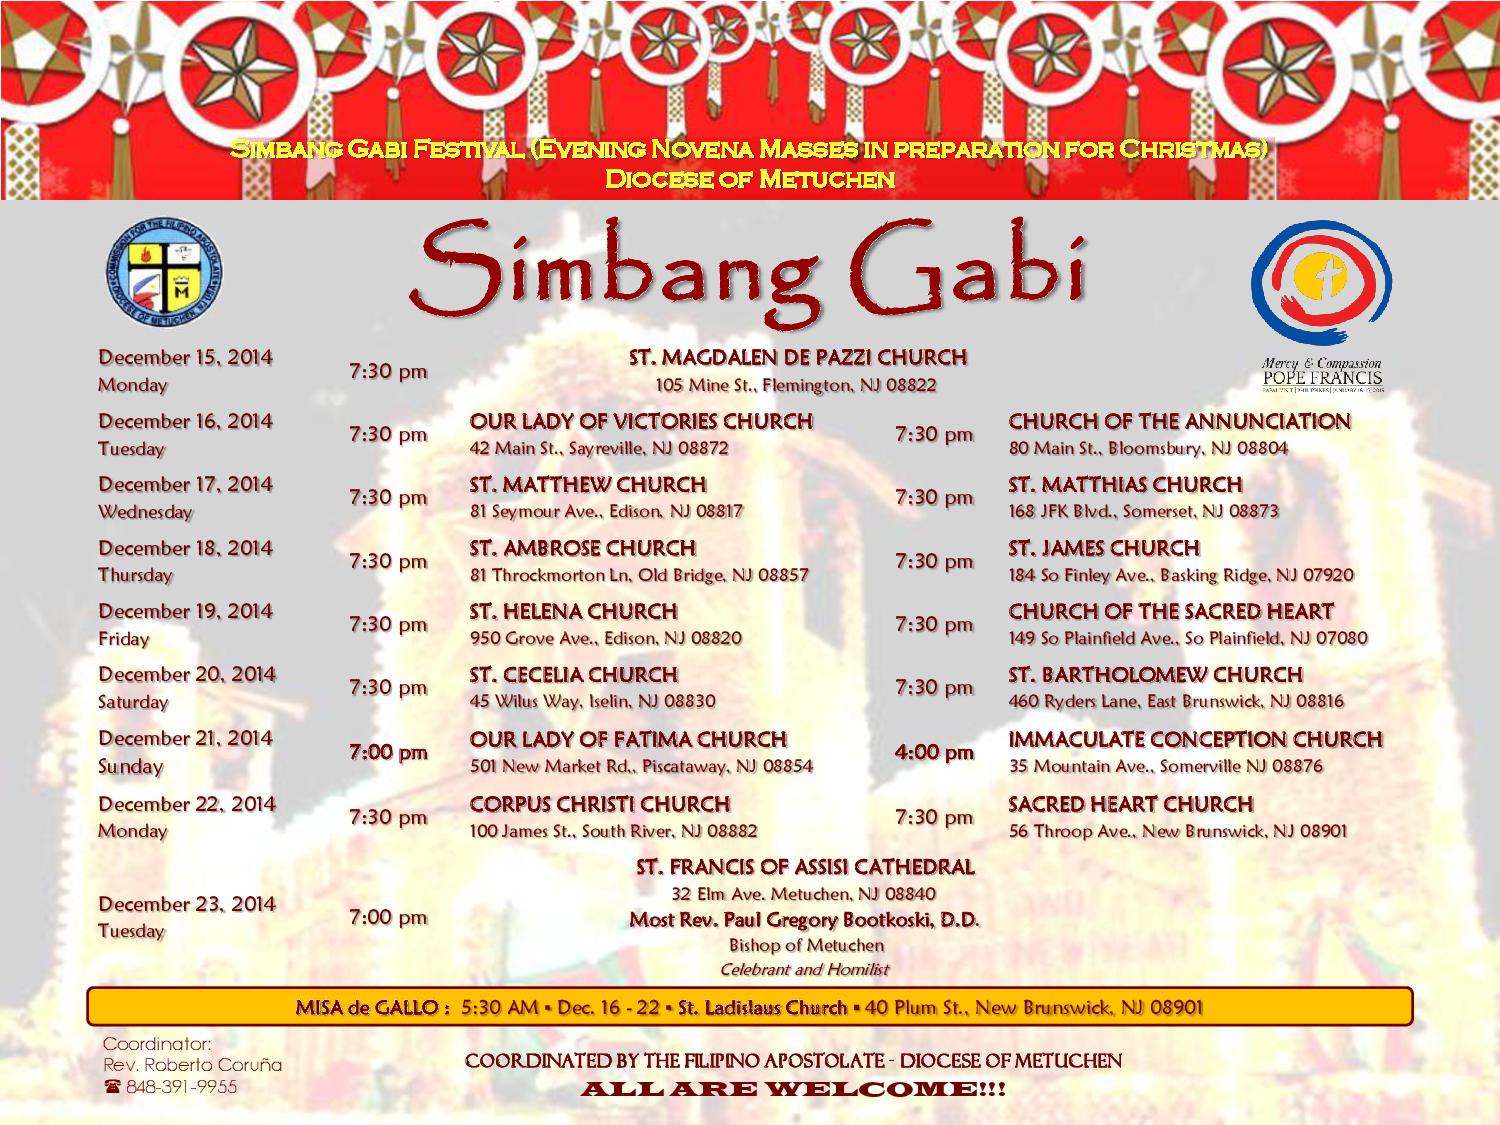 Join us as we participate in the diocese’s series of Simbang Gabi